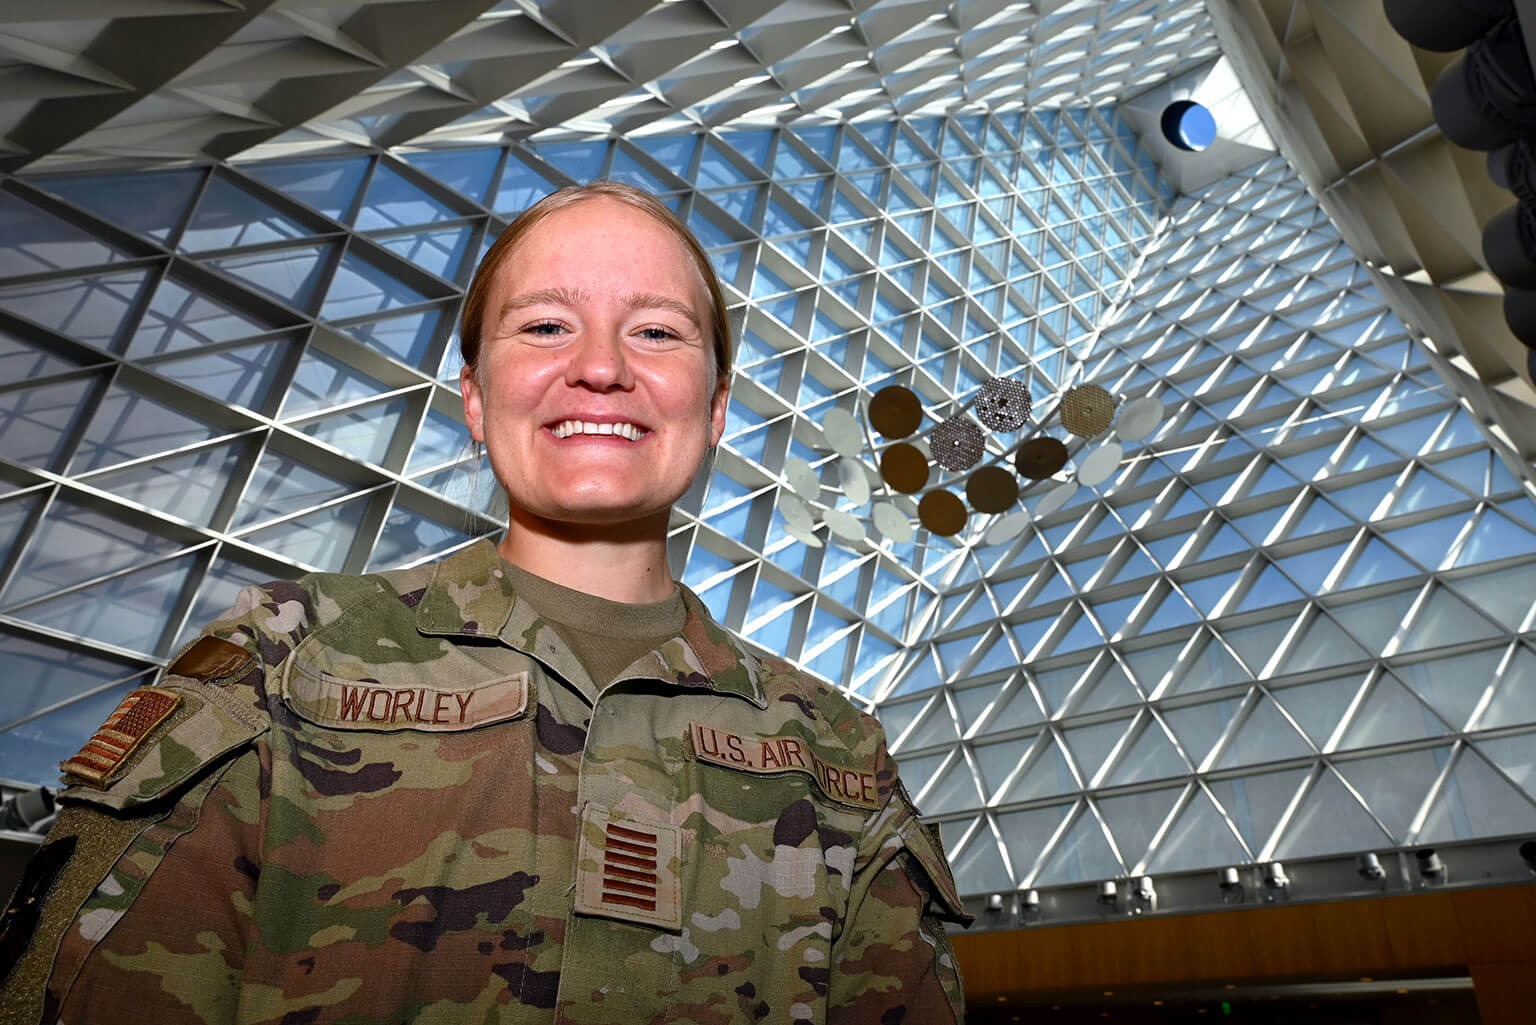 Cadet 1st Class Abigail Worley poses for a photo in Polaris Hall.